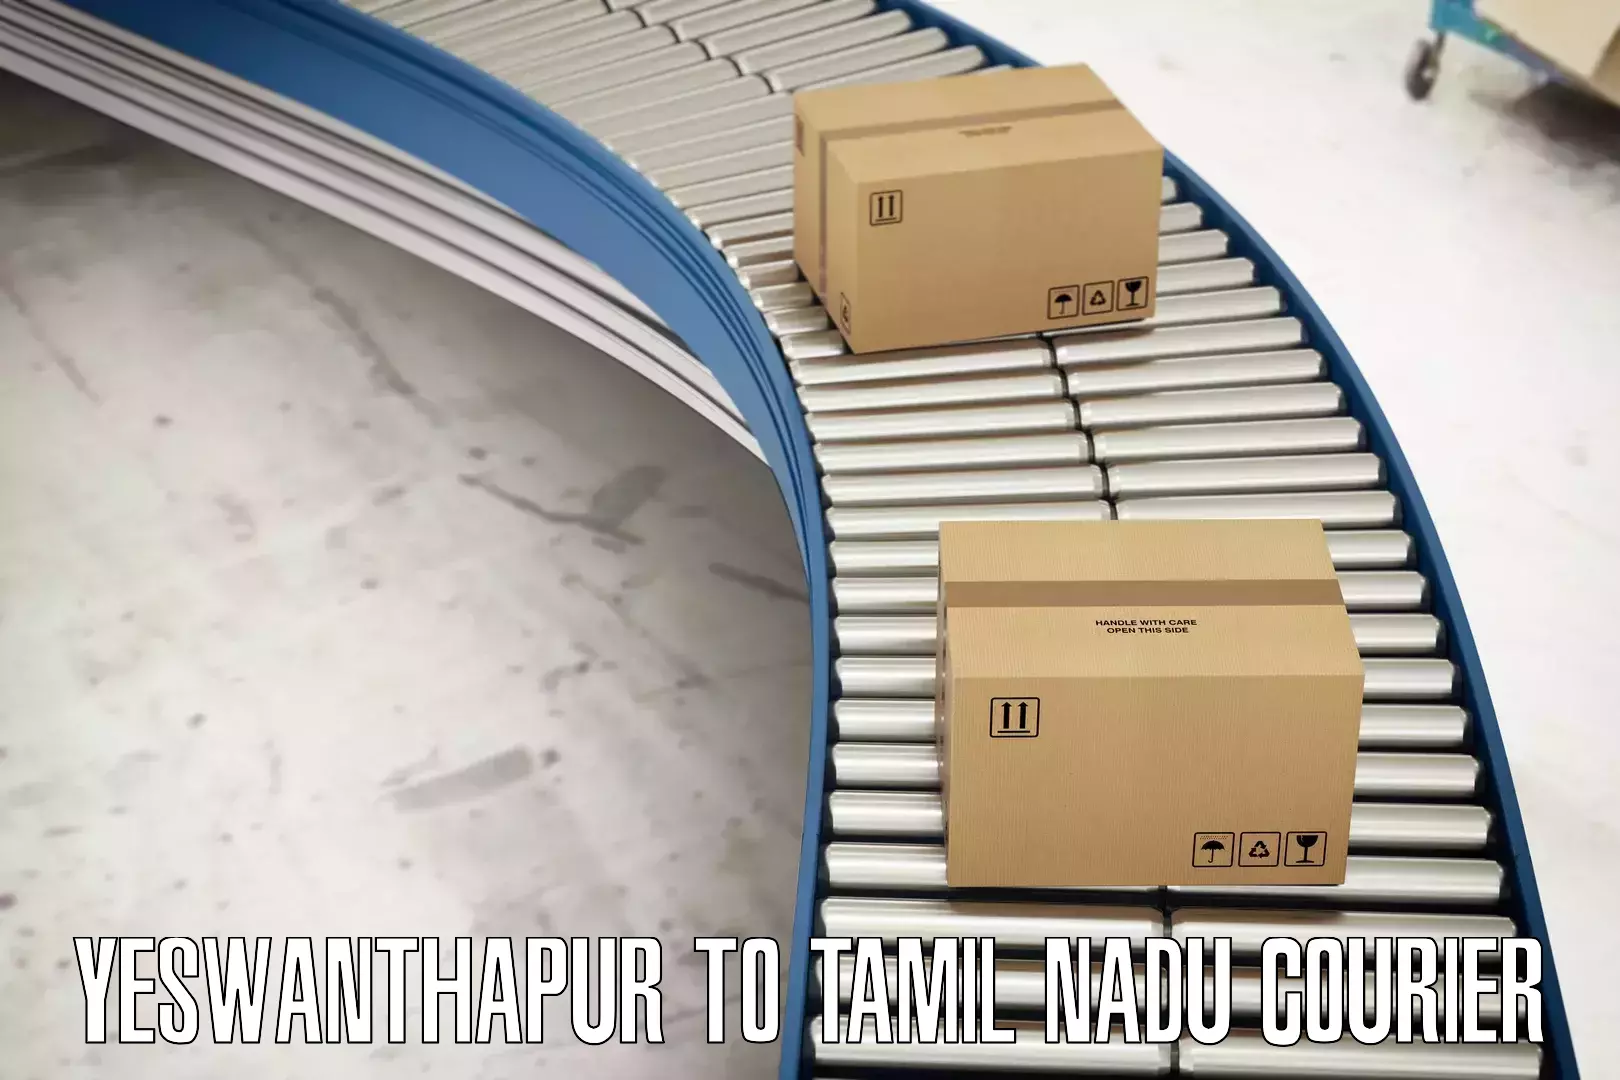 Return courier service Yeswanthapur to Tamil Nadu